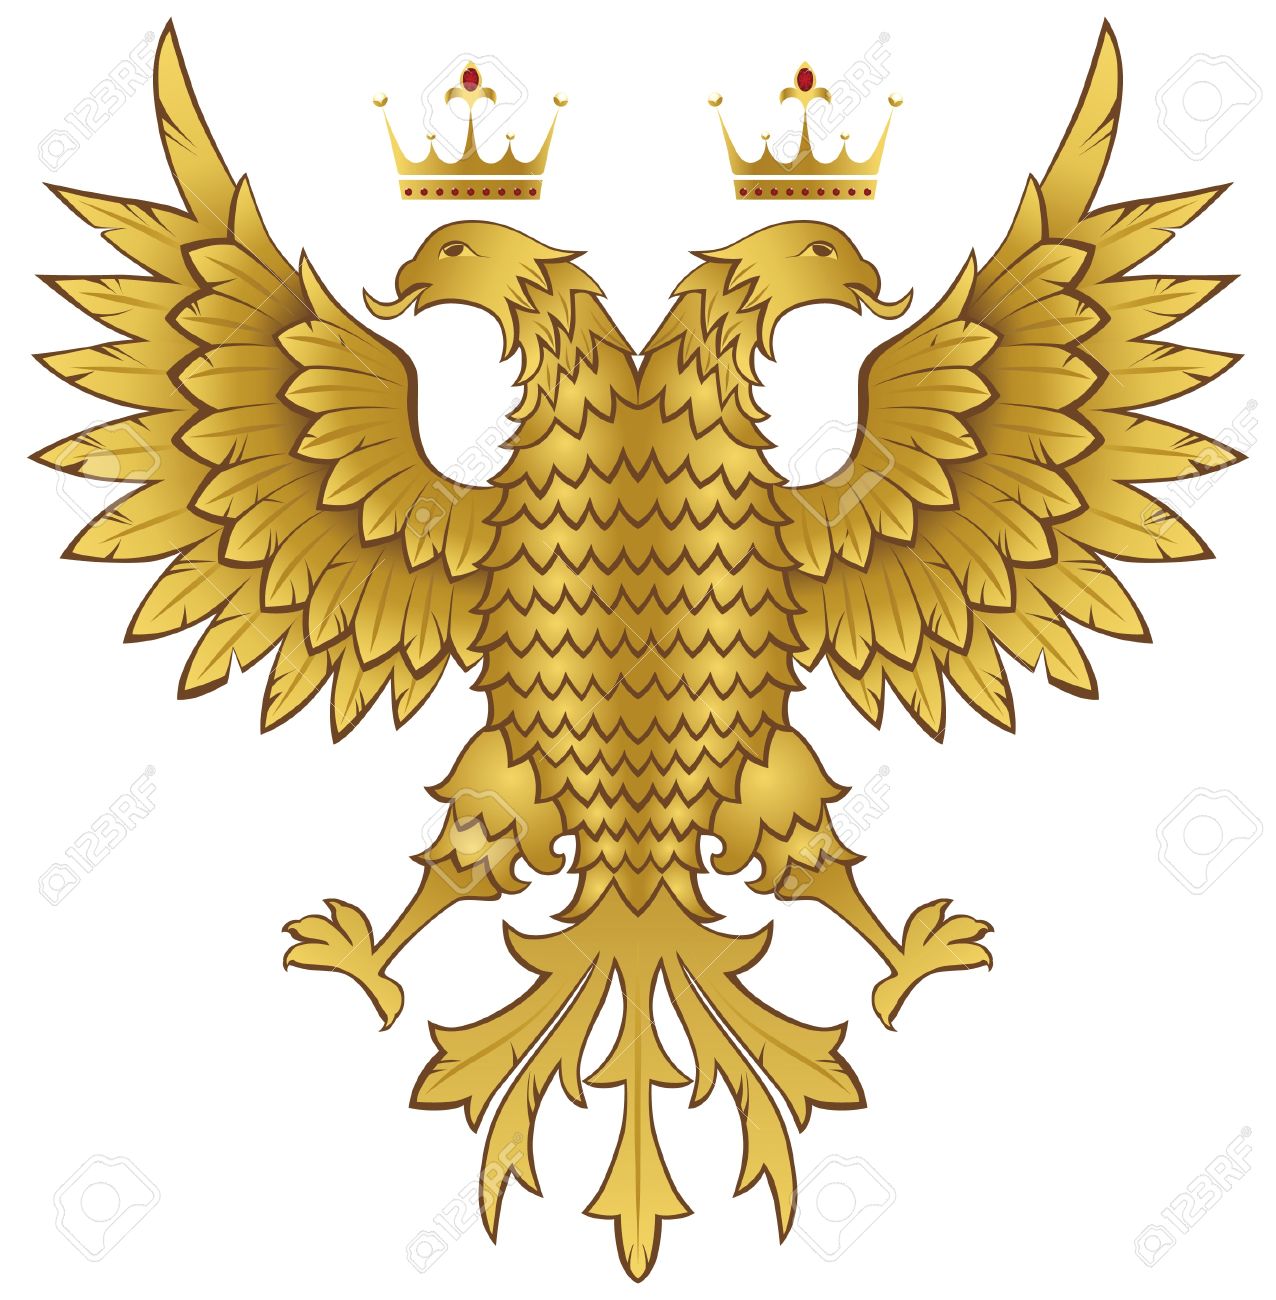 Double Headed Eagle Royalty Free Cliparts, Vectors, And Stock.